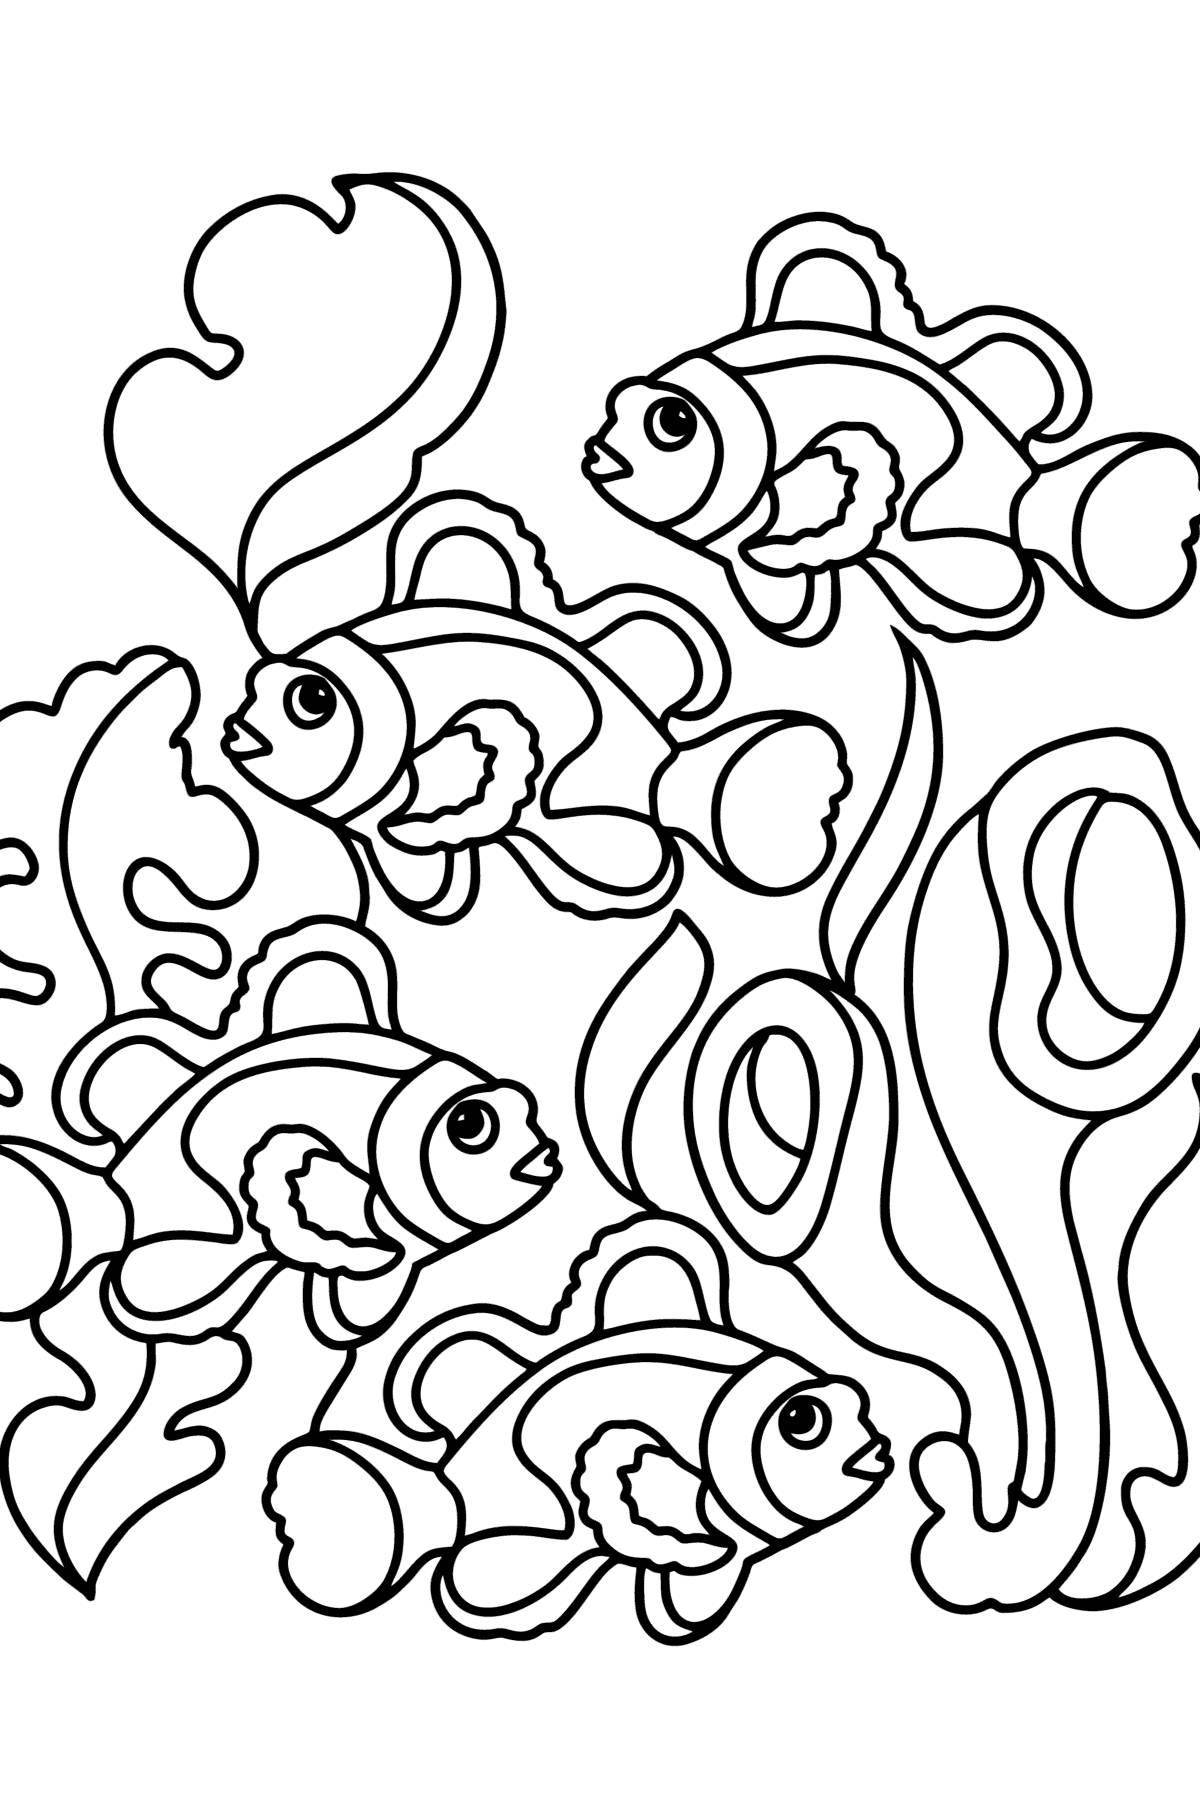 Cute clownfish coloring page